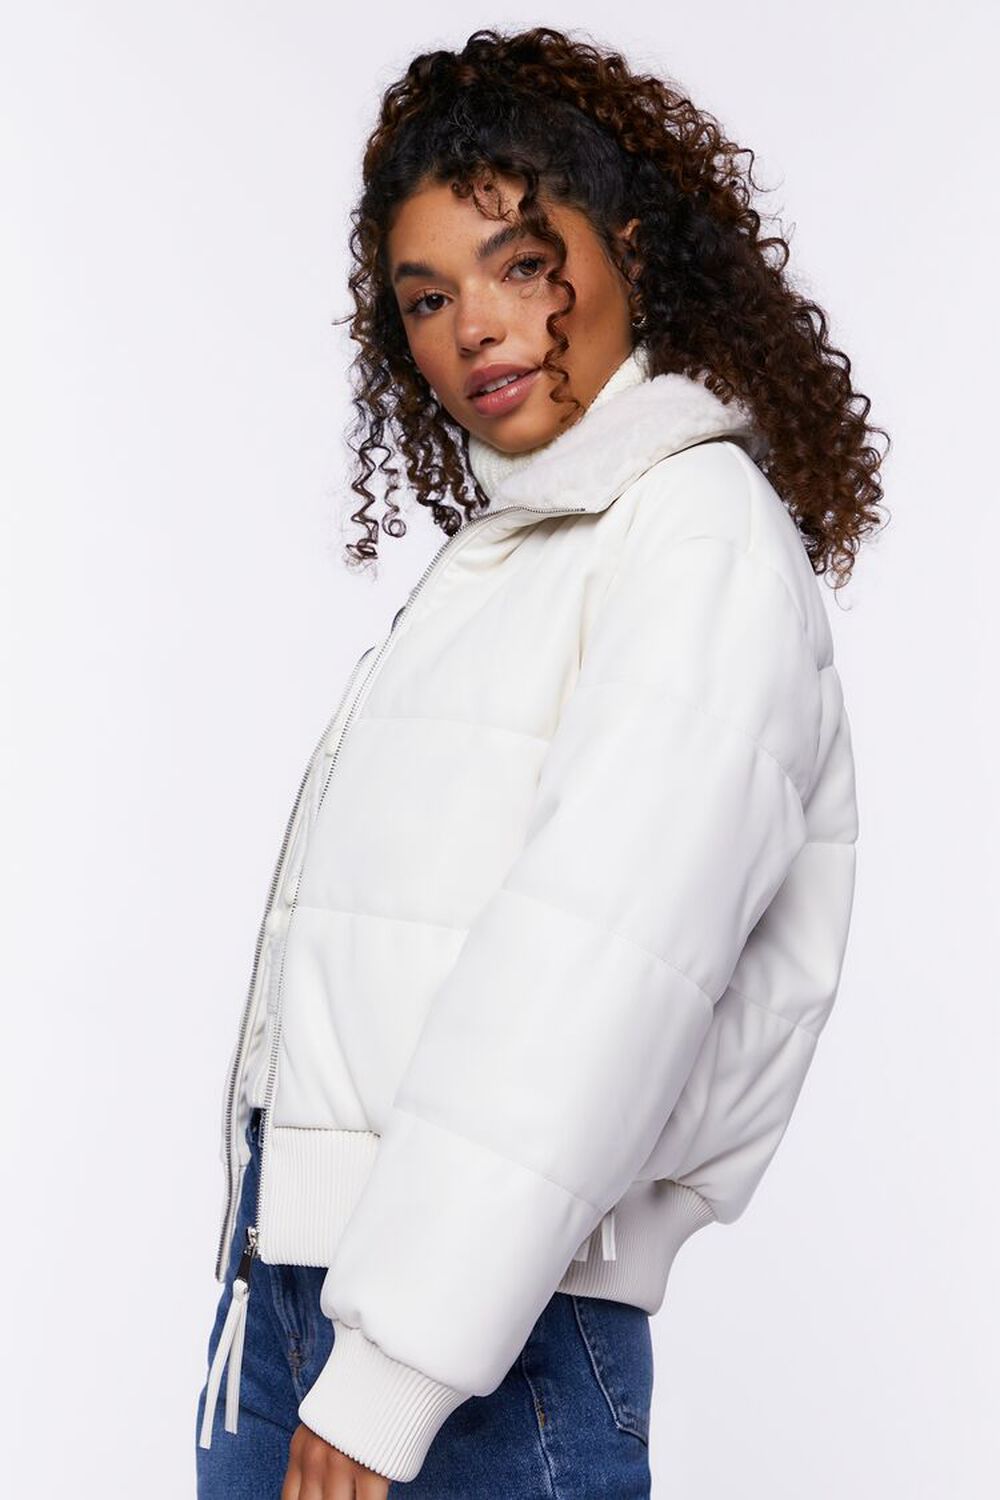 CREAM Faux Leather Zip-Up Puffer Jacket, image 2